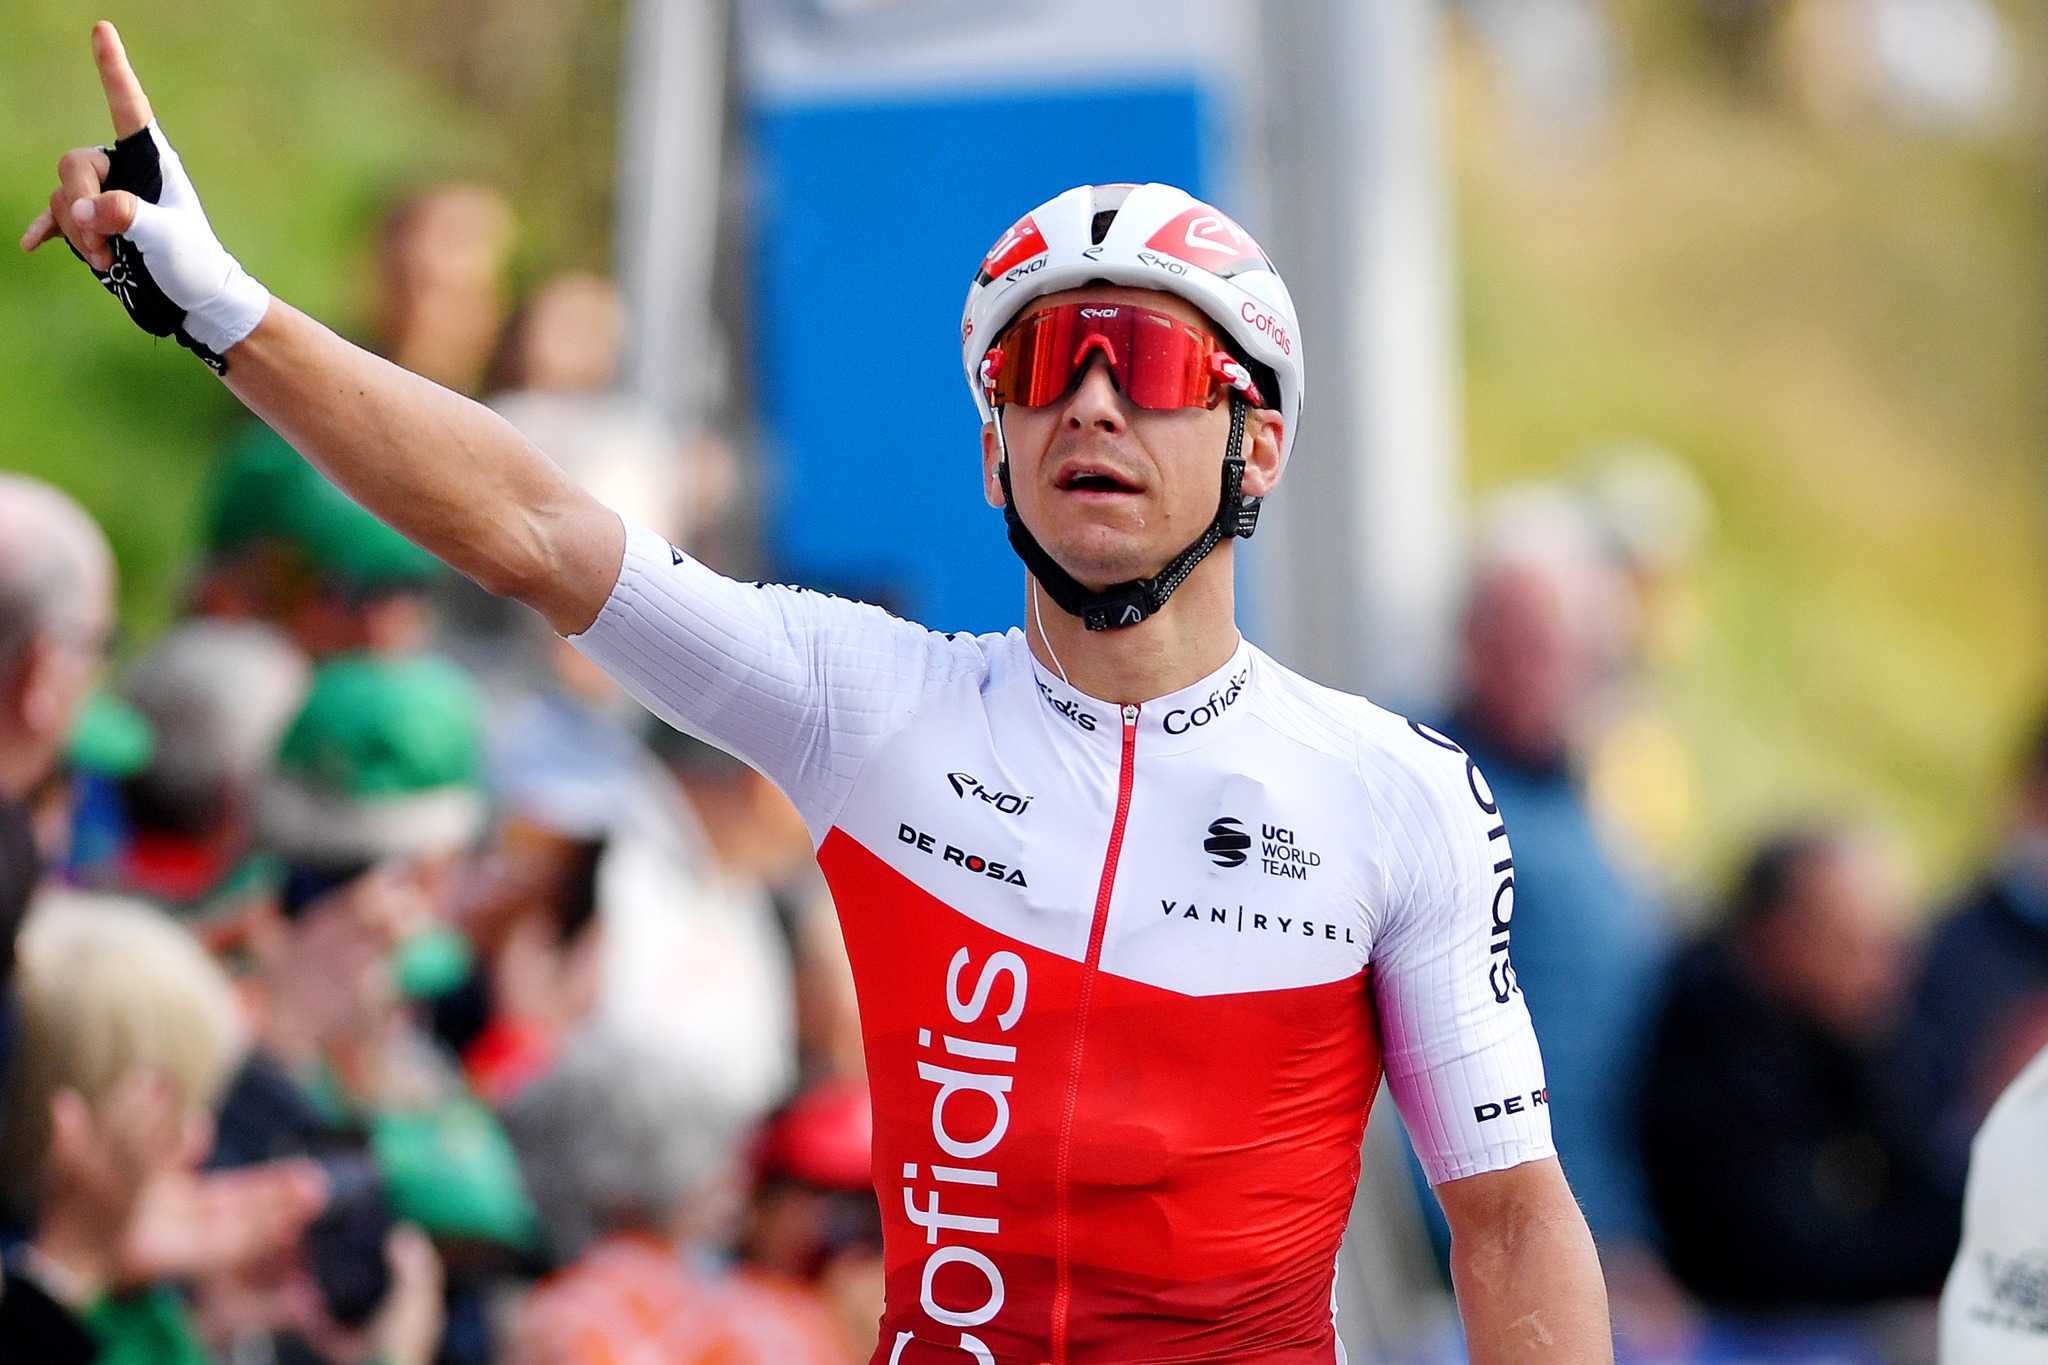  2 wins in the same weekend for the cofidis team